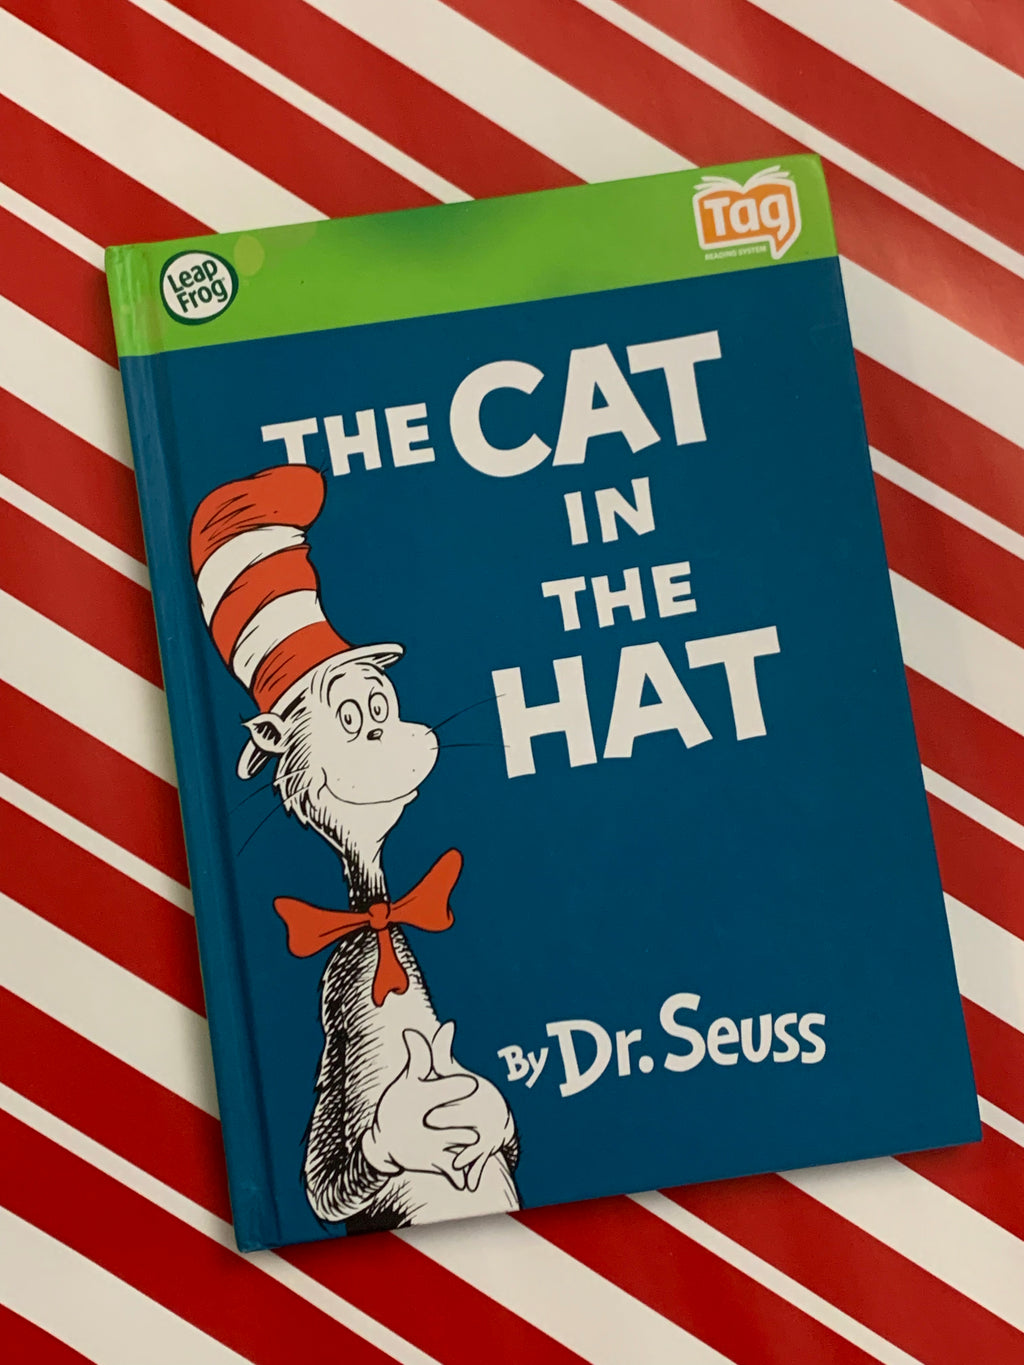 The Cat in the Hat- By Dr. Seuss- Tag Book